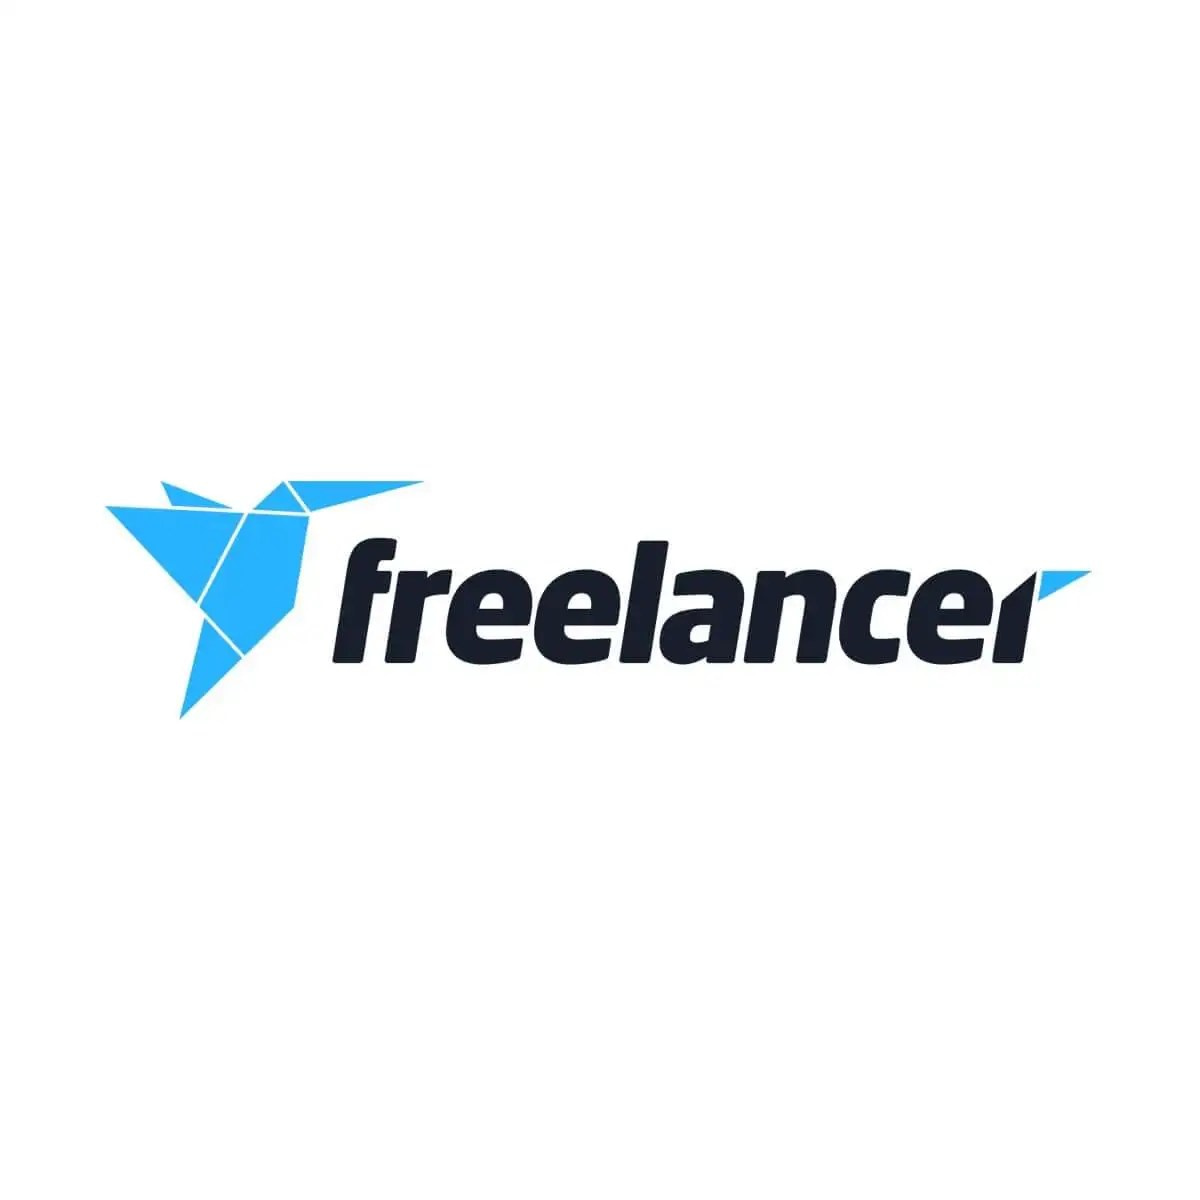 A Step-by-Step Guide to Make Money Online using Freelancing